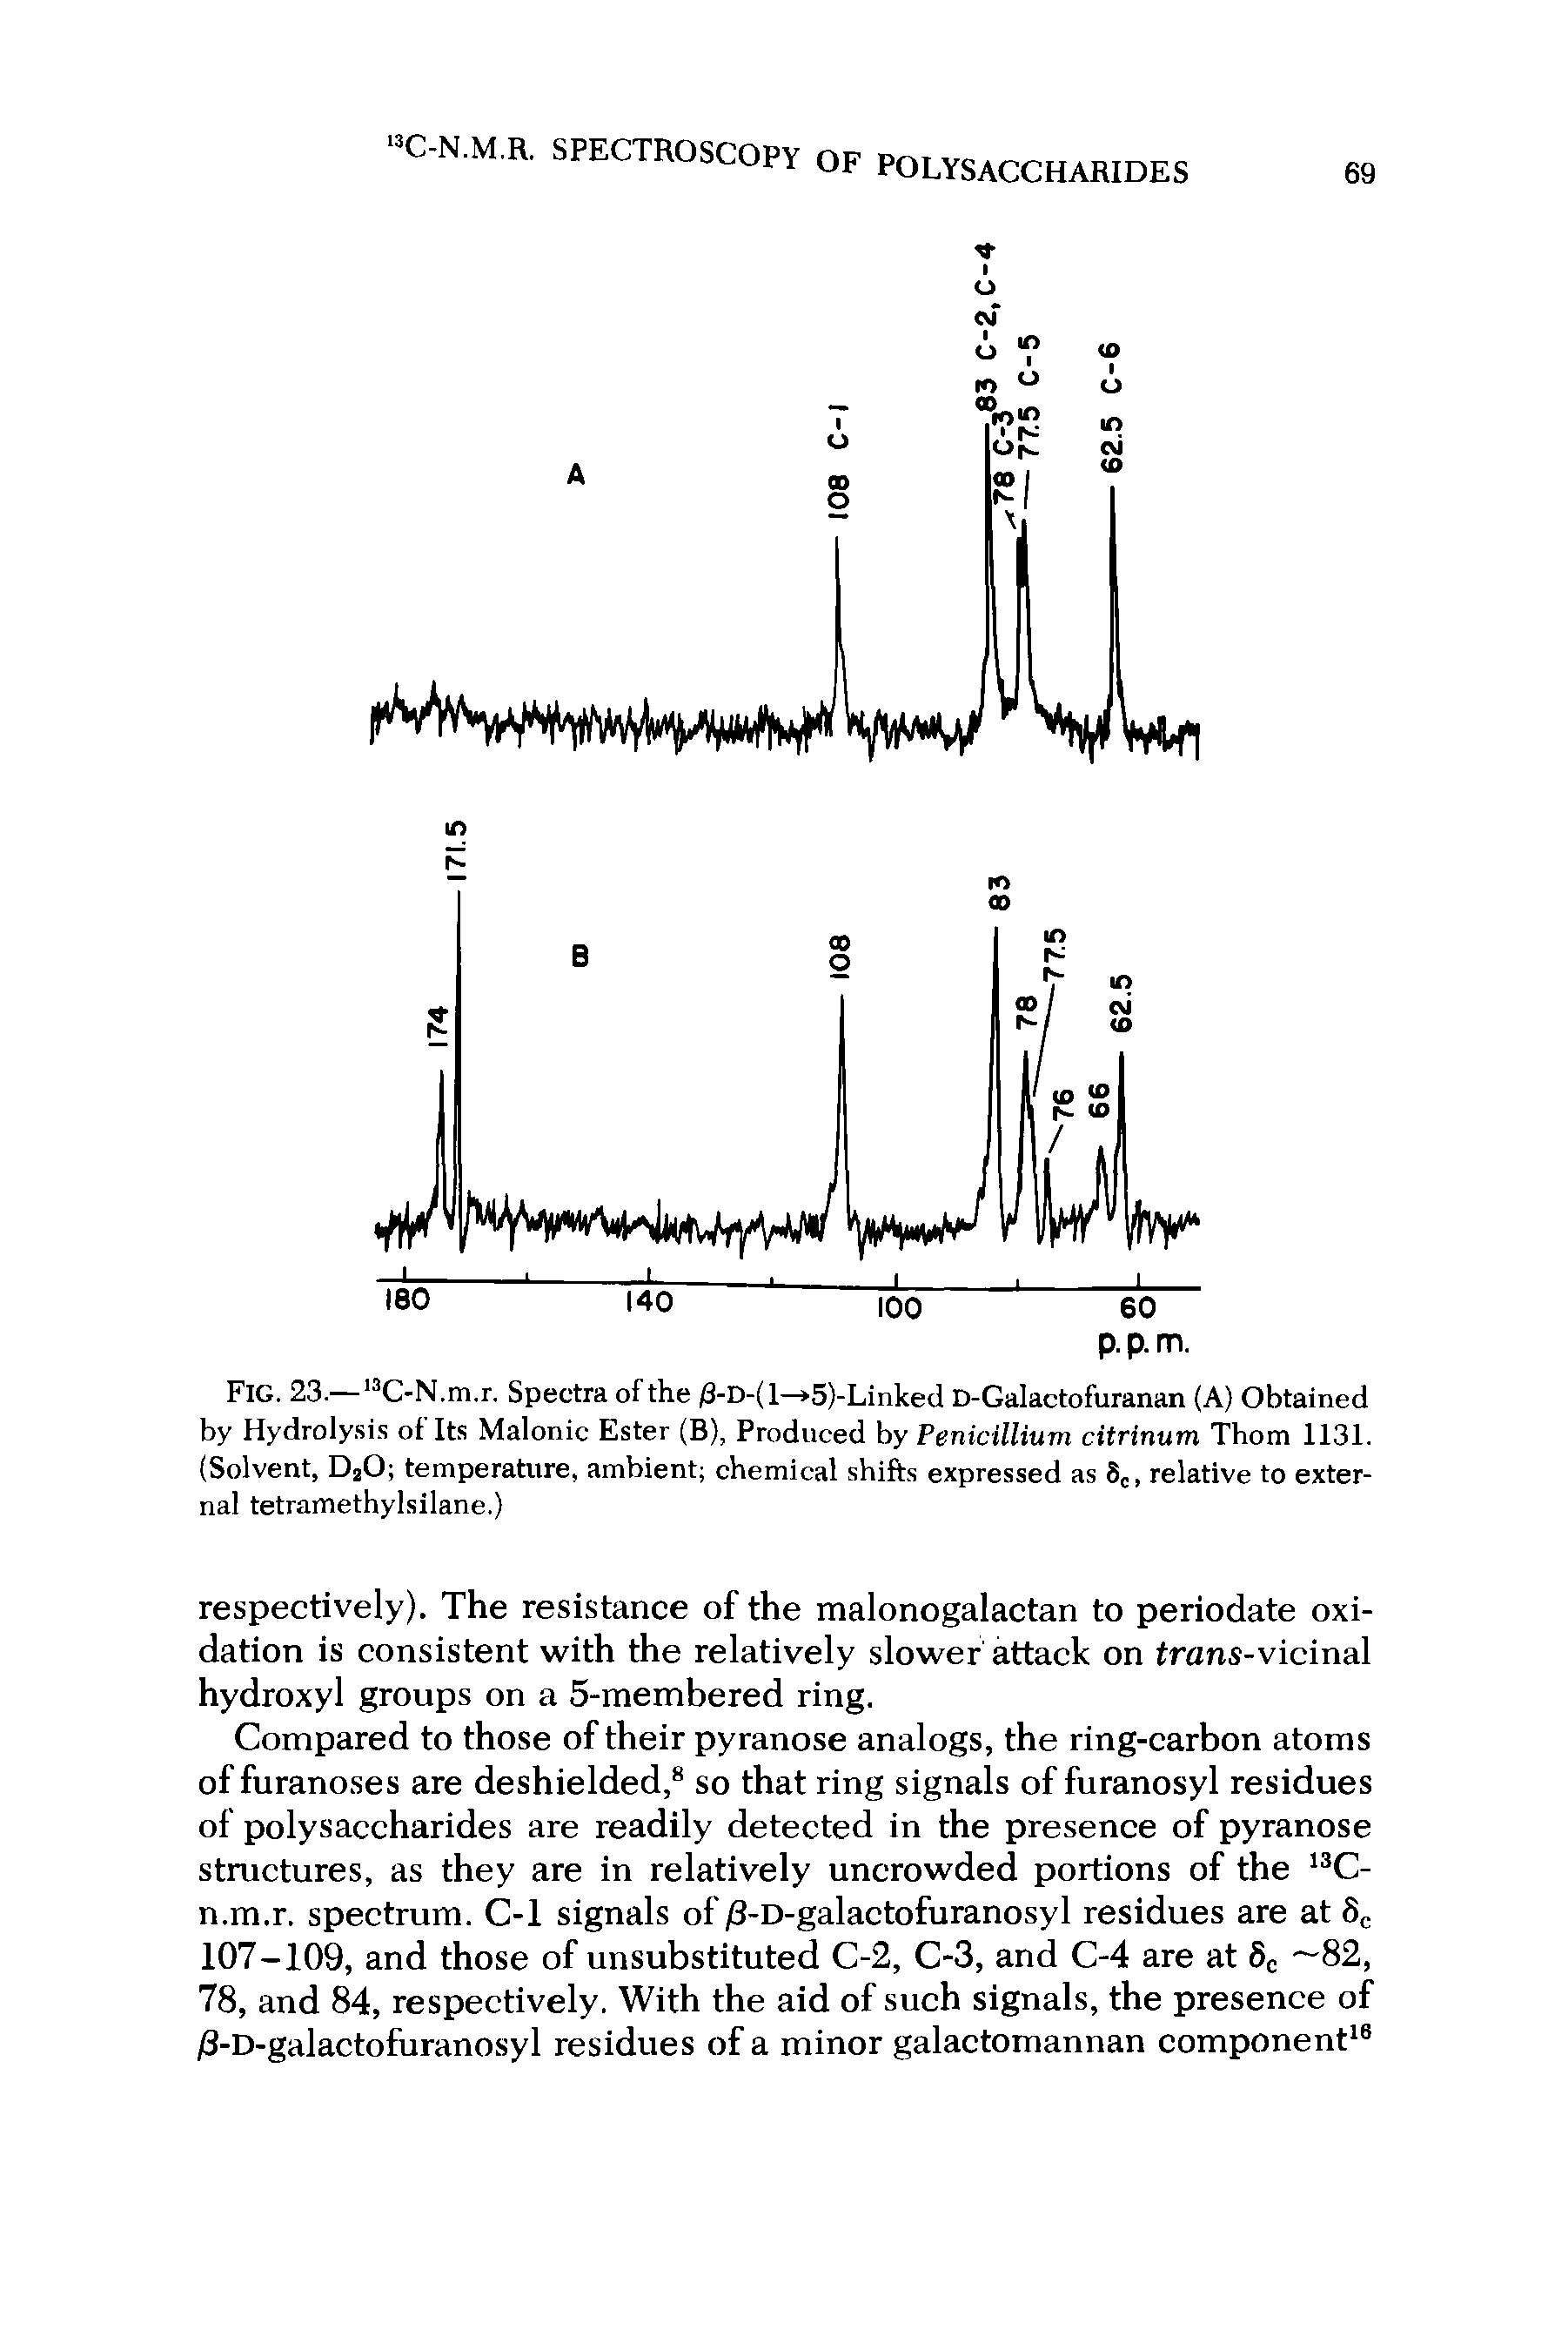 Fig. 23.— 13C-N.m.r. Spectra of the /3-D-( 1—>5)-Linked D-Galactofuranan (A) Obtained by Hydrolysis of Its Malonic Ester (B), Produced by Penicillium citrinum Thom 1131. (Solvent, D20 temperature, ambient chemical shifts expressed as 8C, relative to external tetramethylsilane.)...